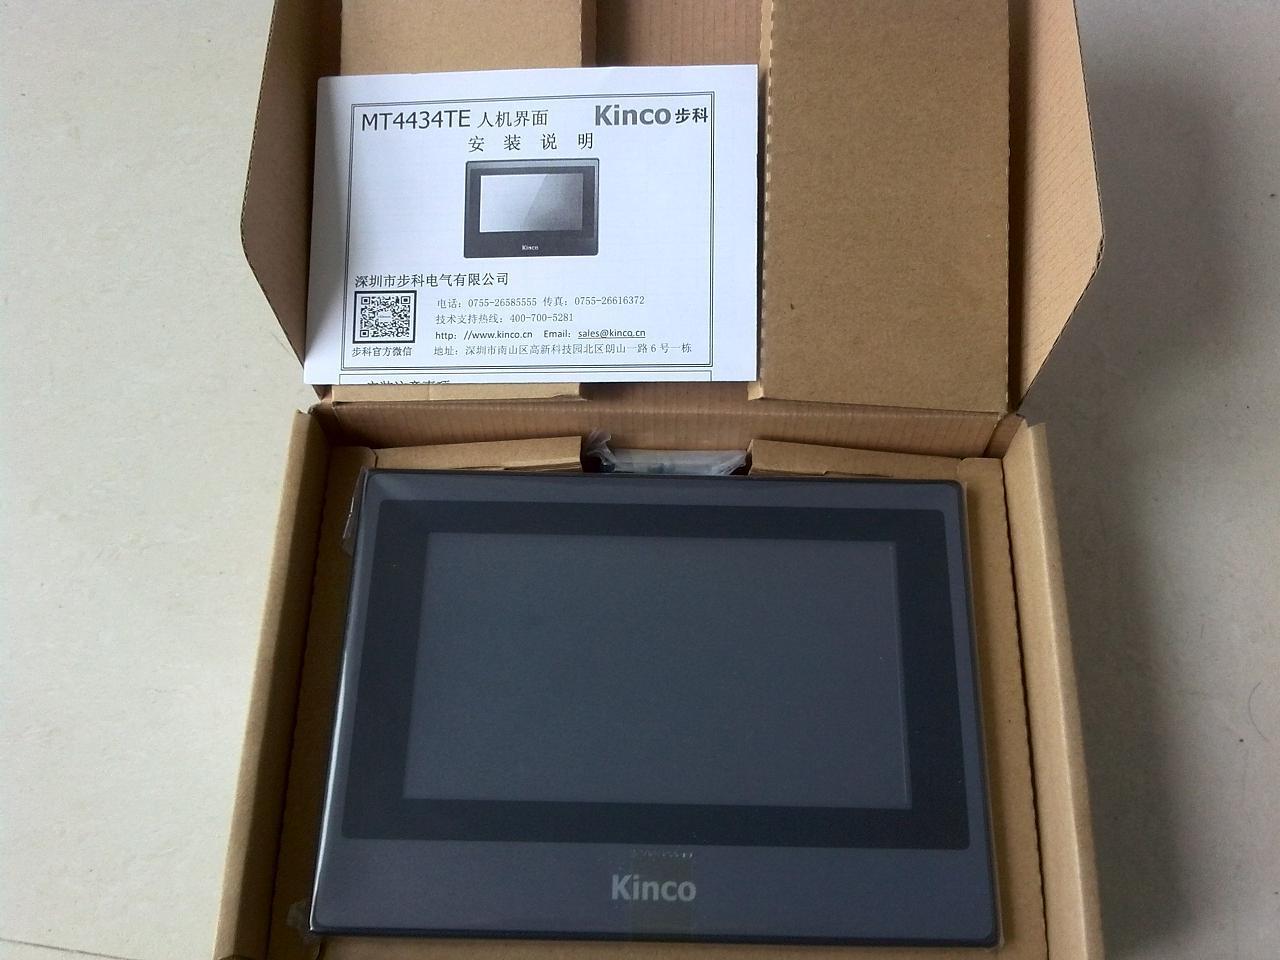 MT4434TE KINCO HMI Touch Screen 7 inch 800*480 Ethernet 1 USB Host new i - Click Image to Close